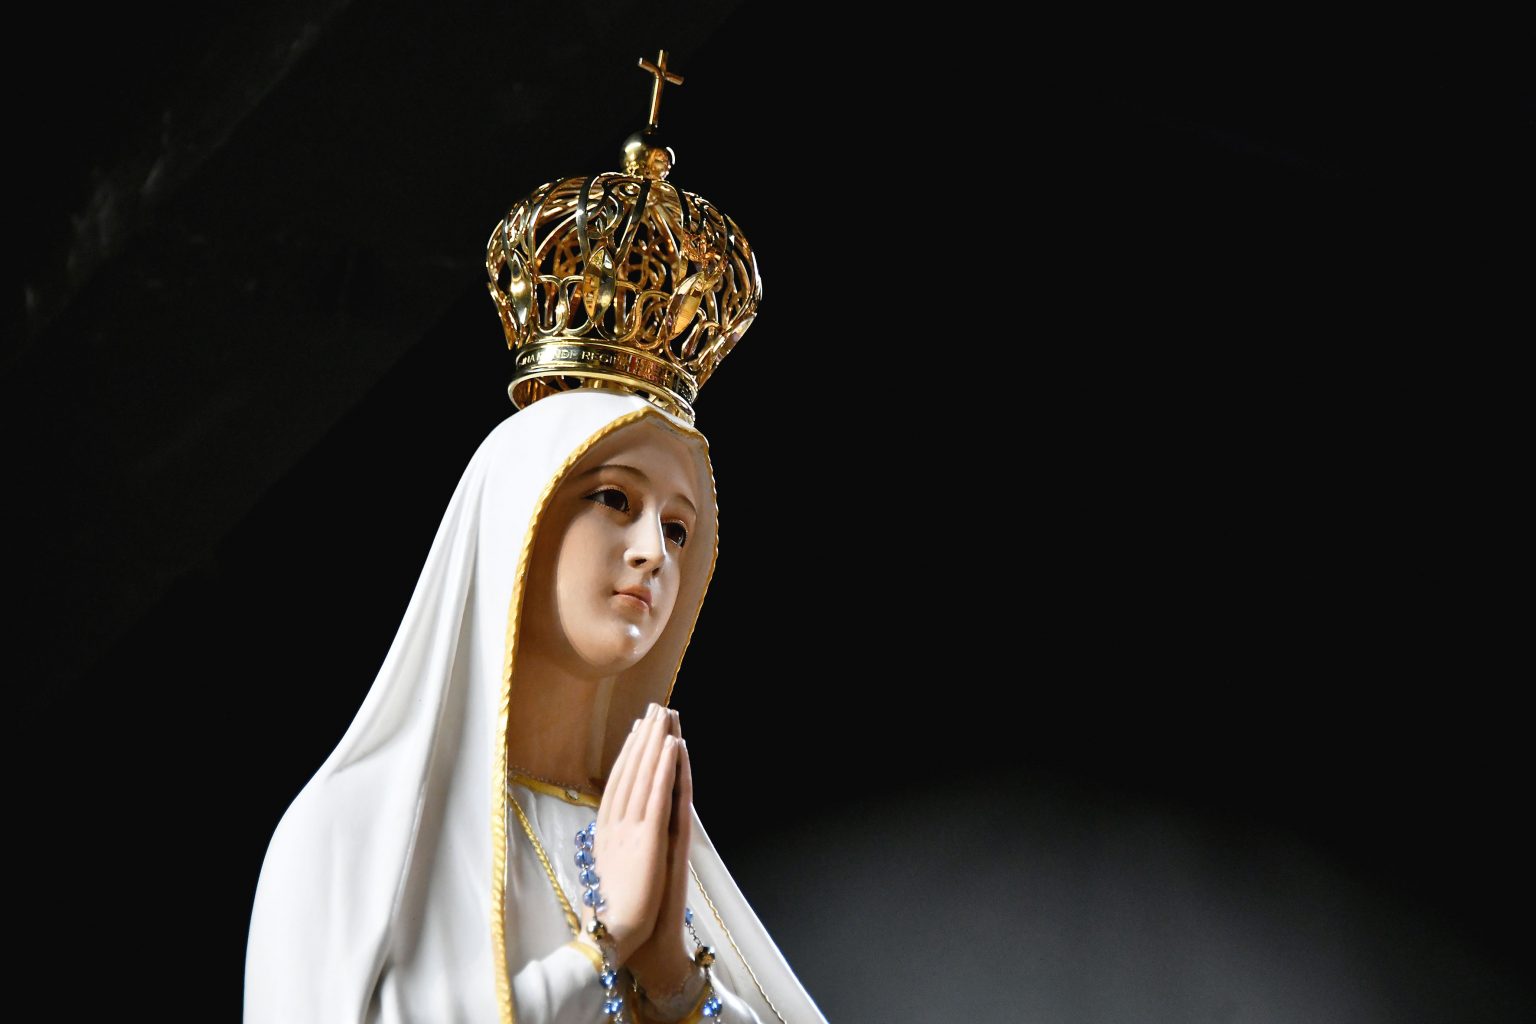 Load video: Light  candle in Fatima